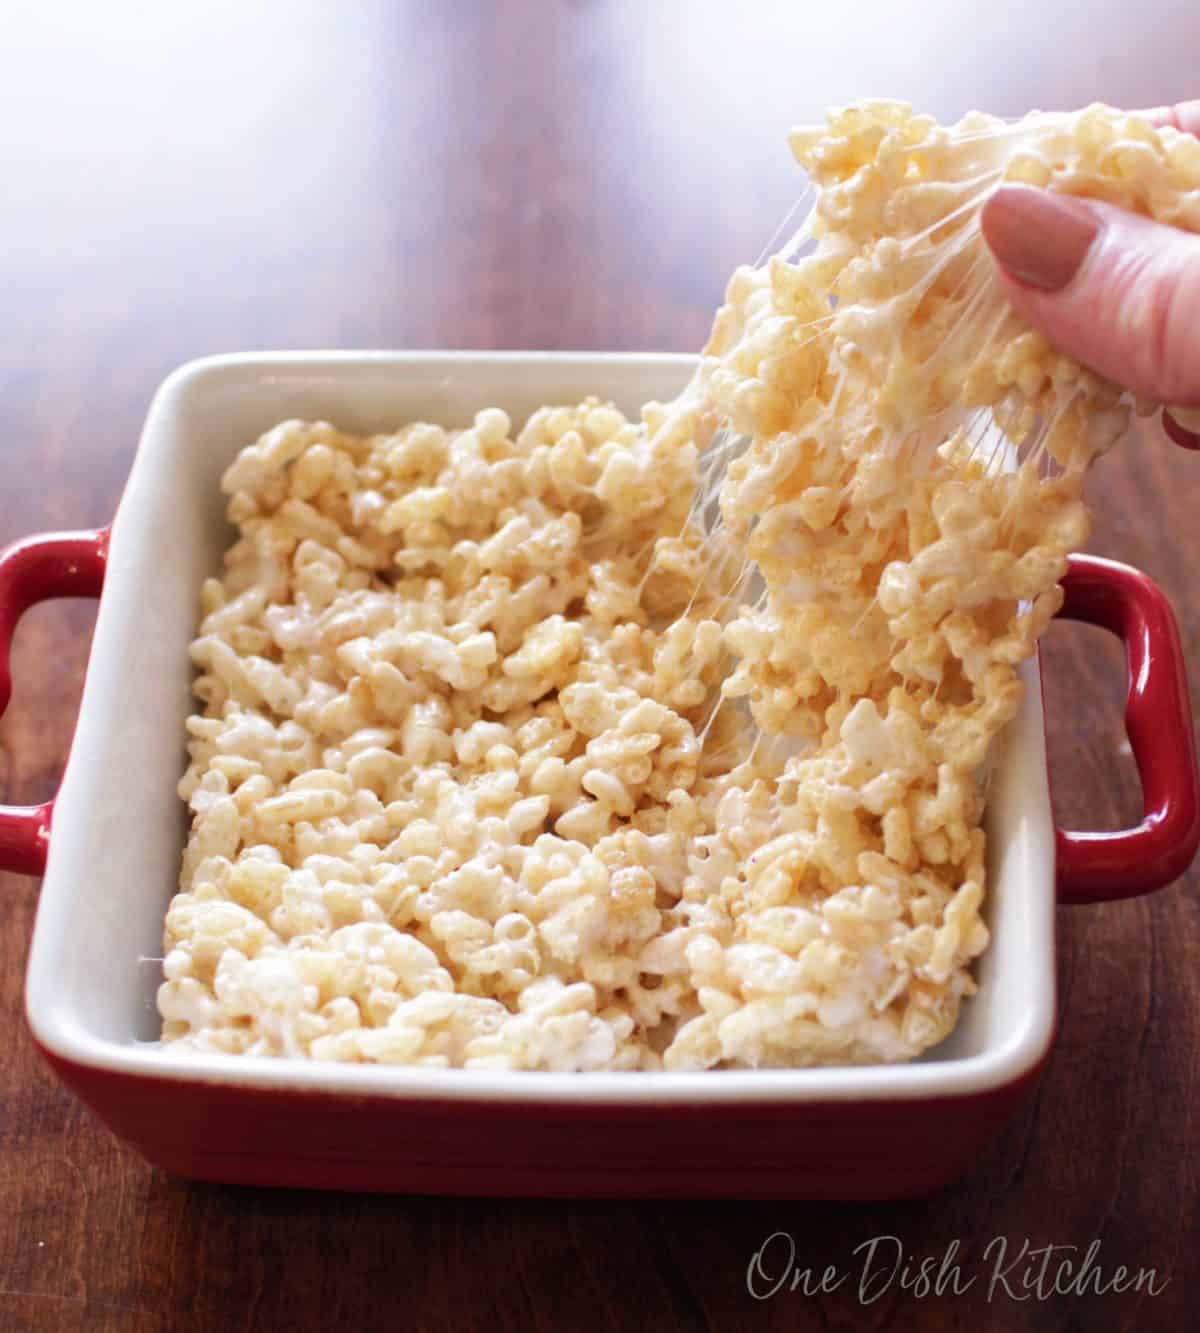 Pulling off a piece of a rice krispie treat with fingers from a small baking dish.